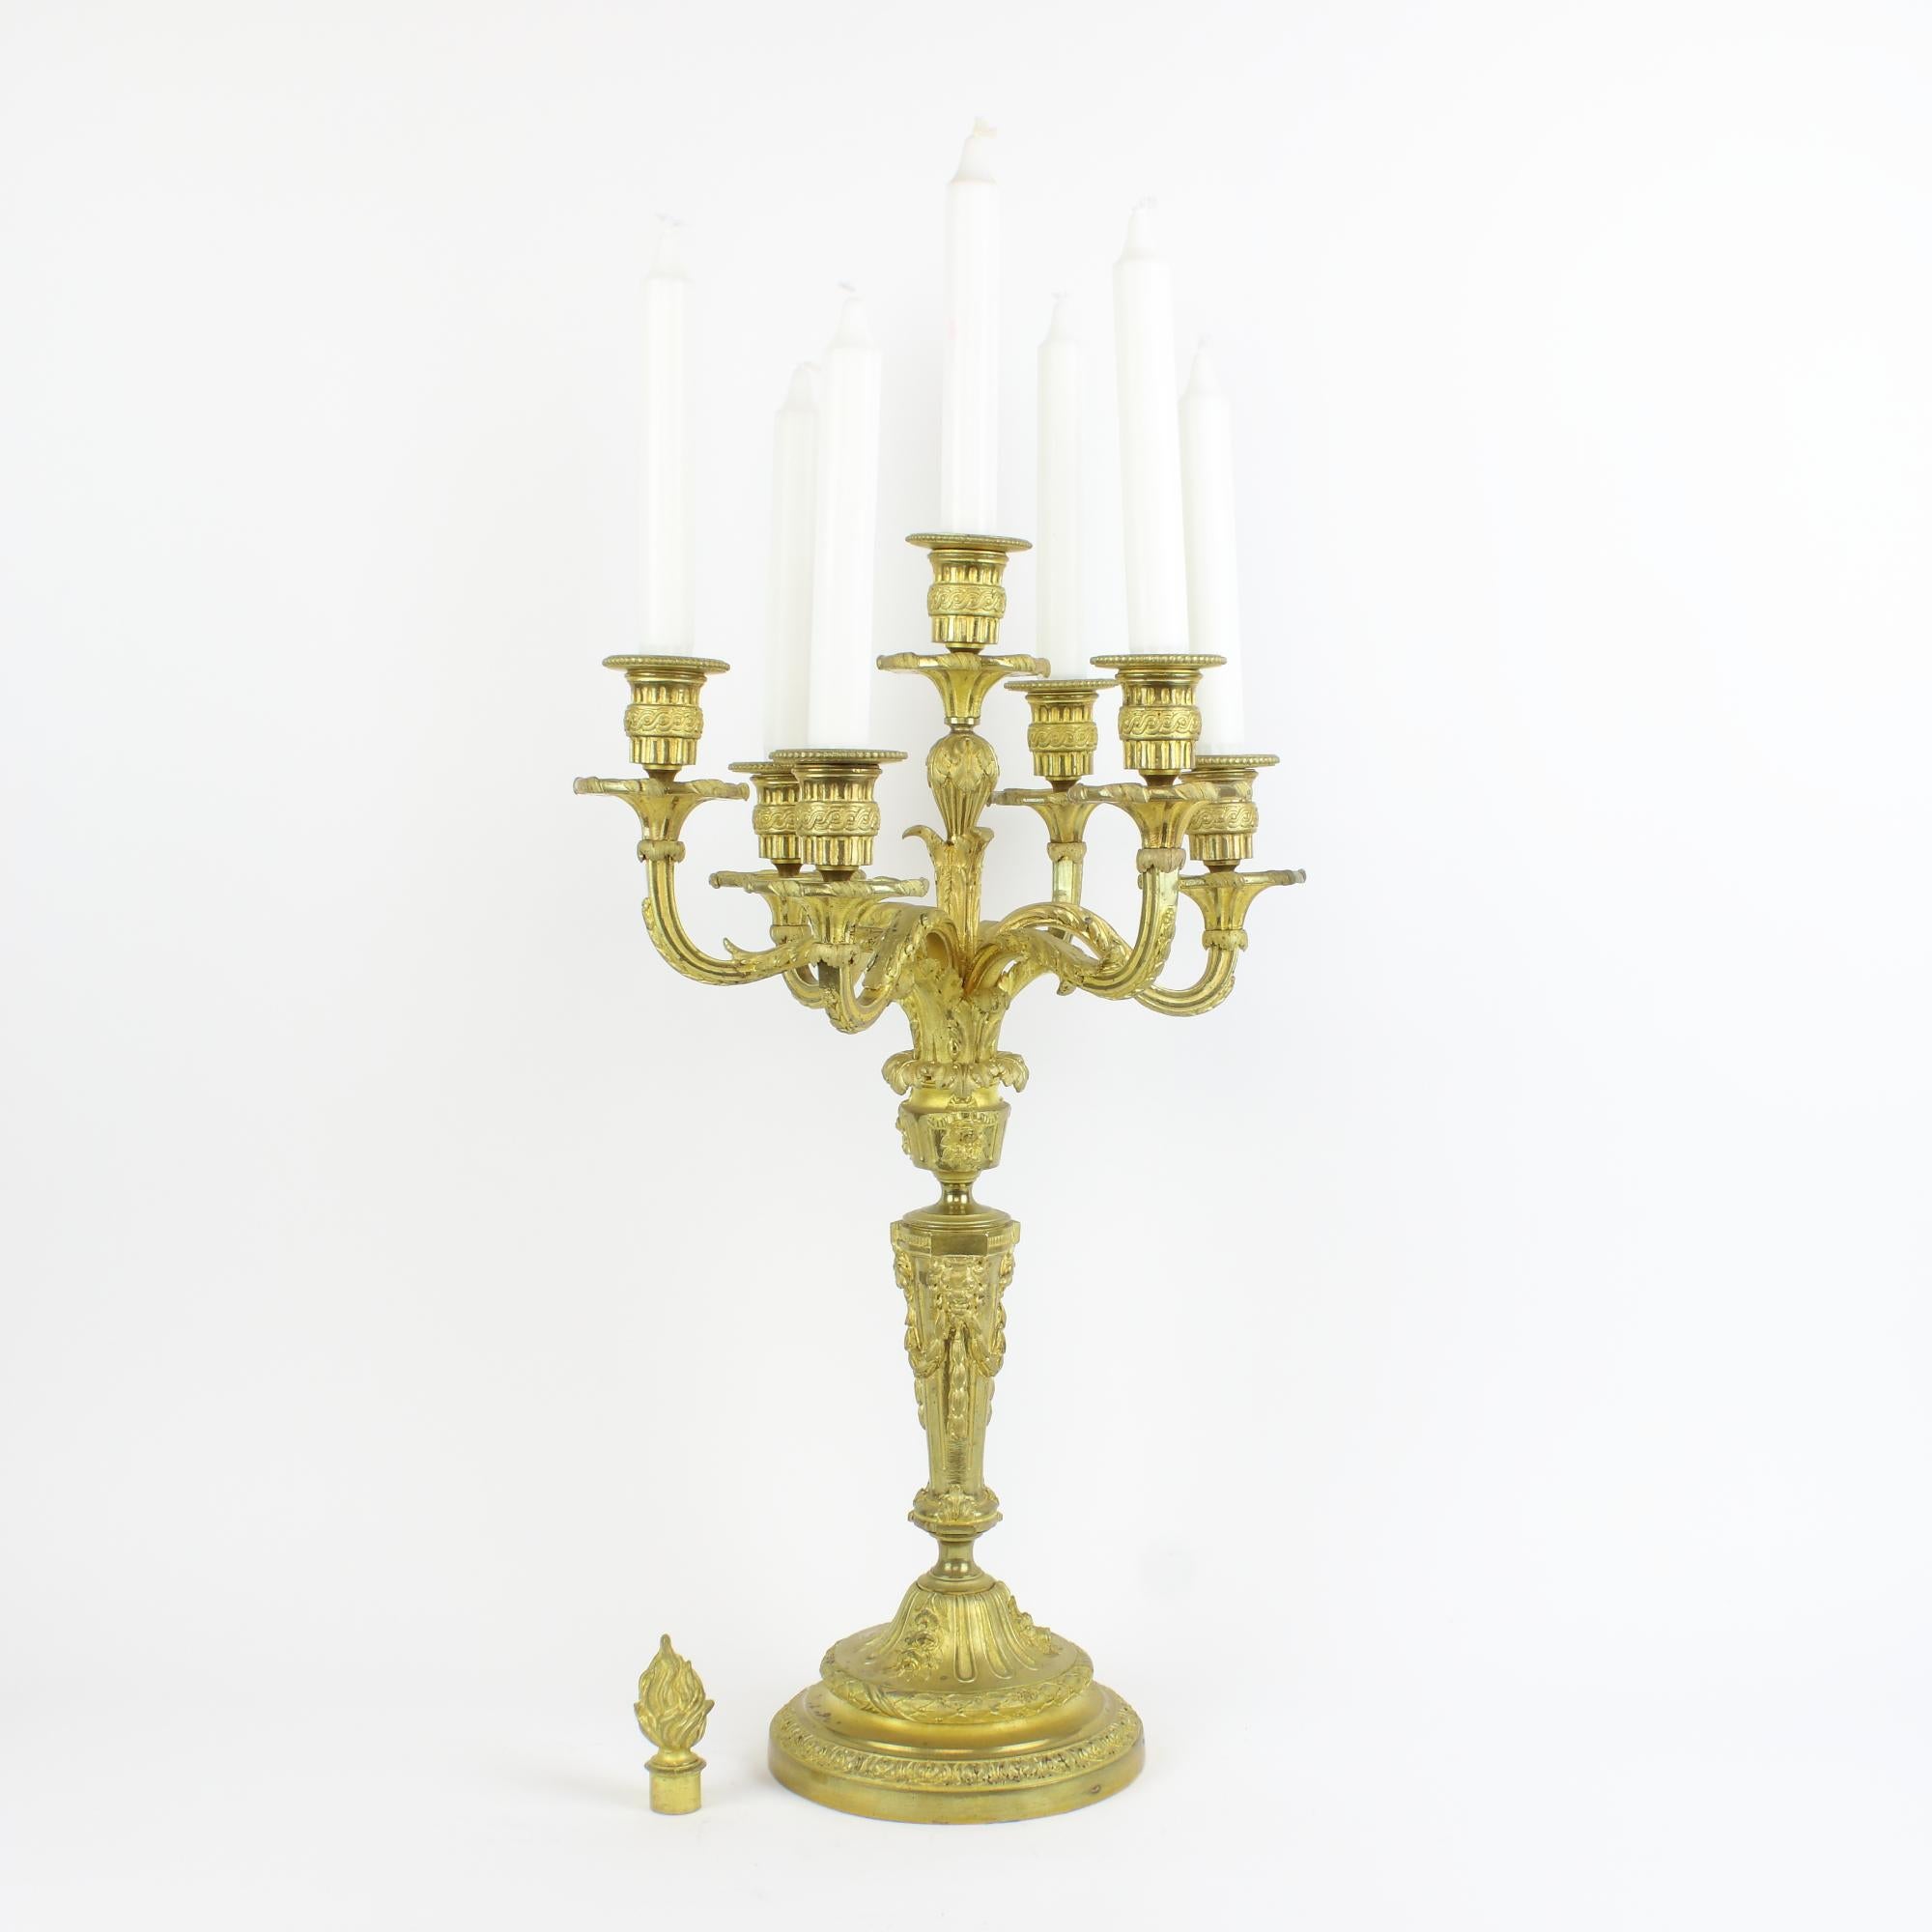 19th century French gilt bronze 7-Light Louis XVI candelabra in the manner of Jean-Charles Delafosse (1734-1789)

The tapering stem standing on a circular base cast with foliage and decorated with lion heads holding festoons with their teeth. The